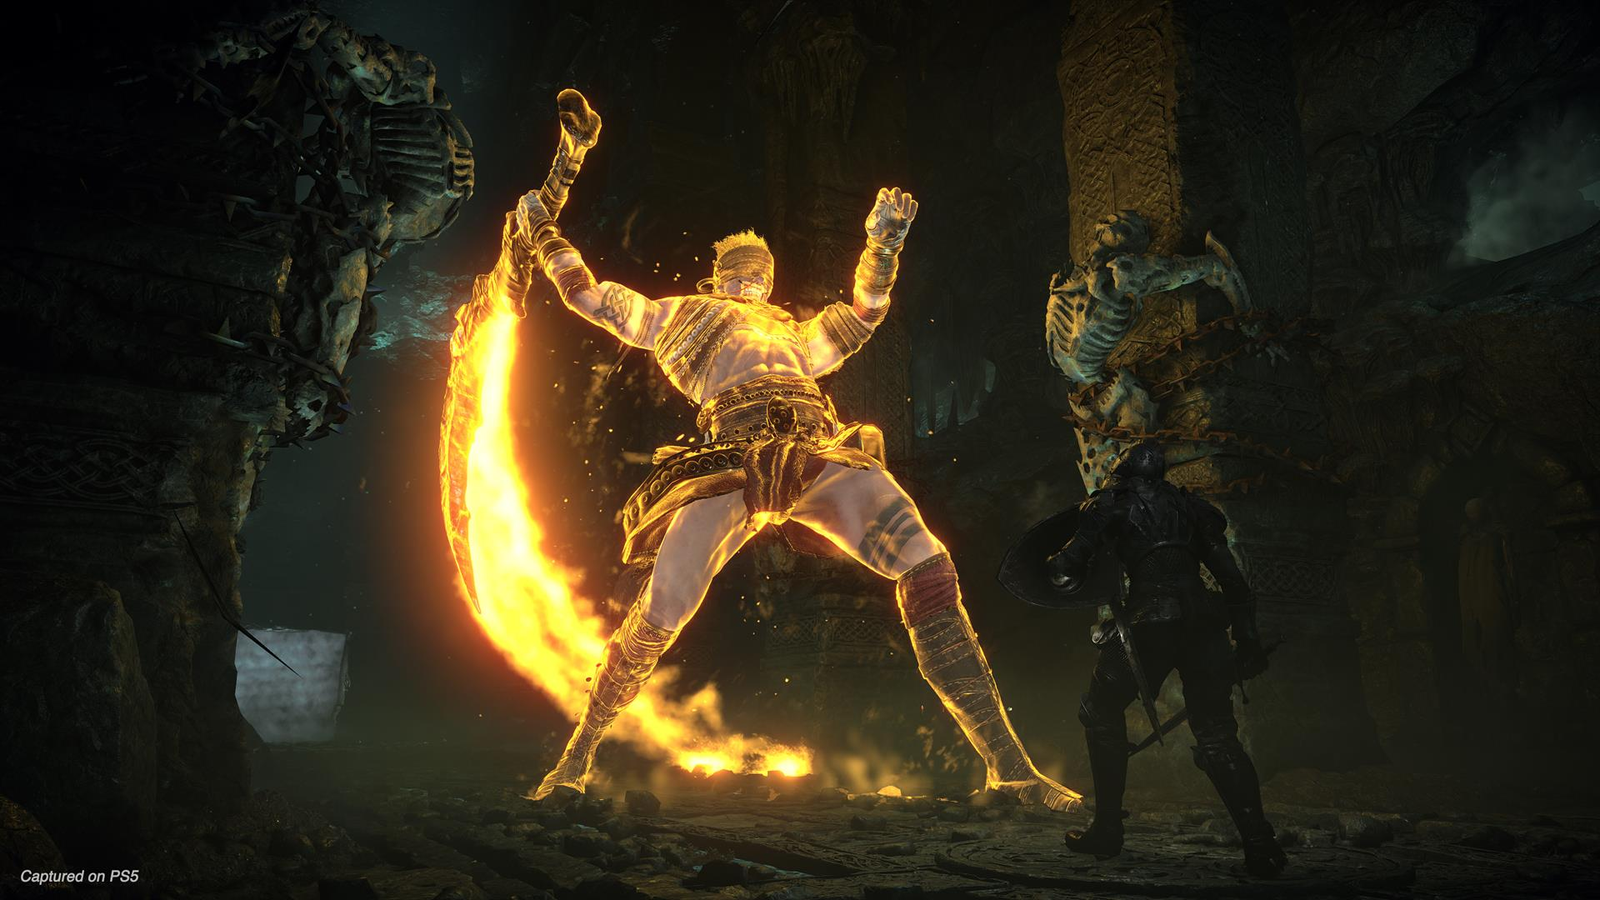 Demon's Souls: How Does Multiplayer and Online Play Work?